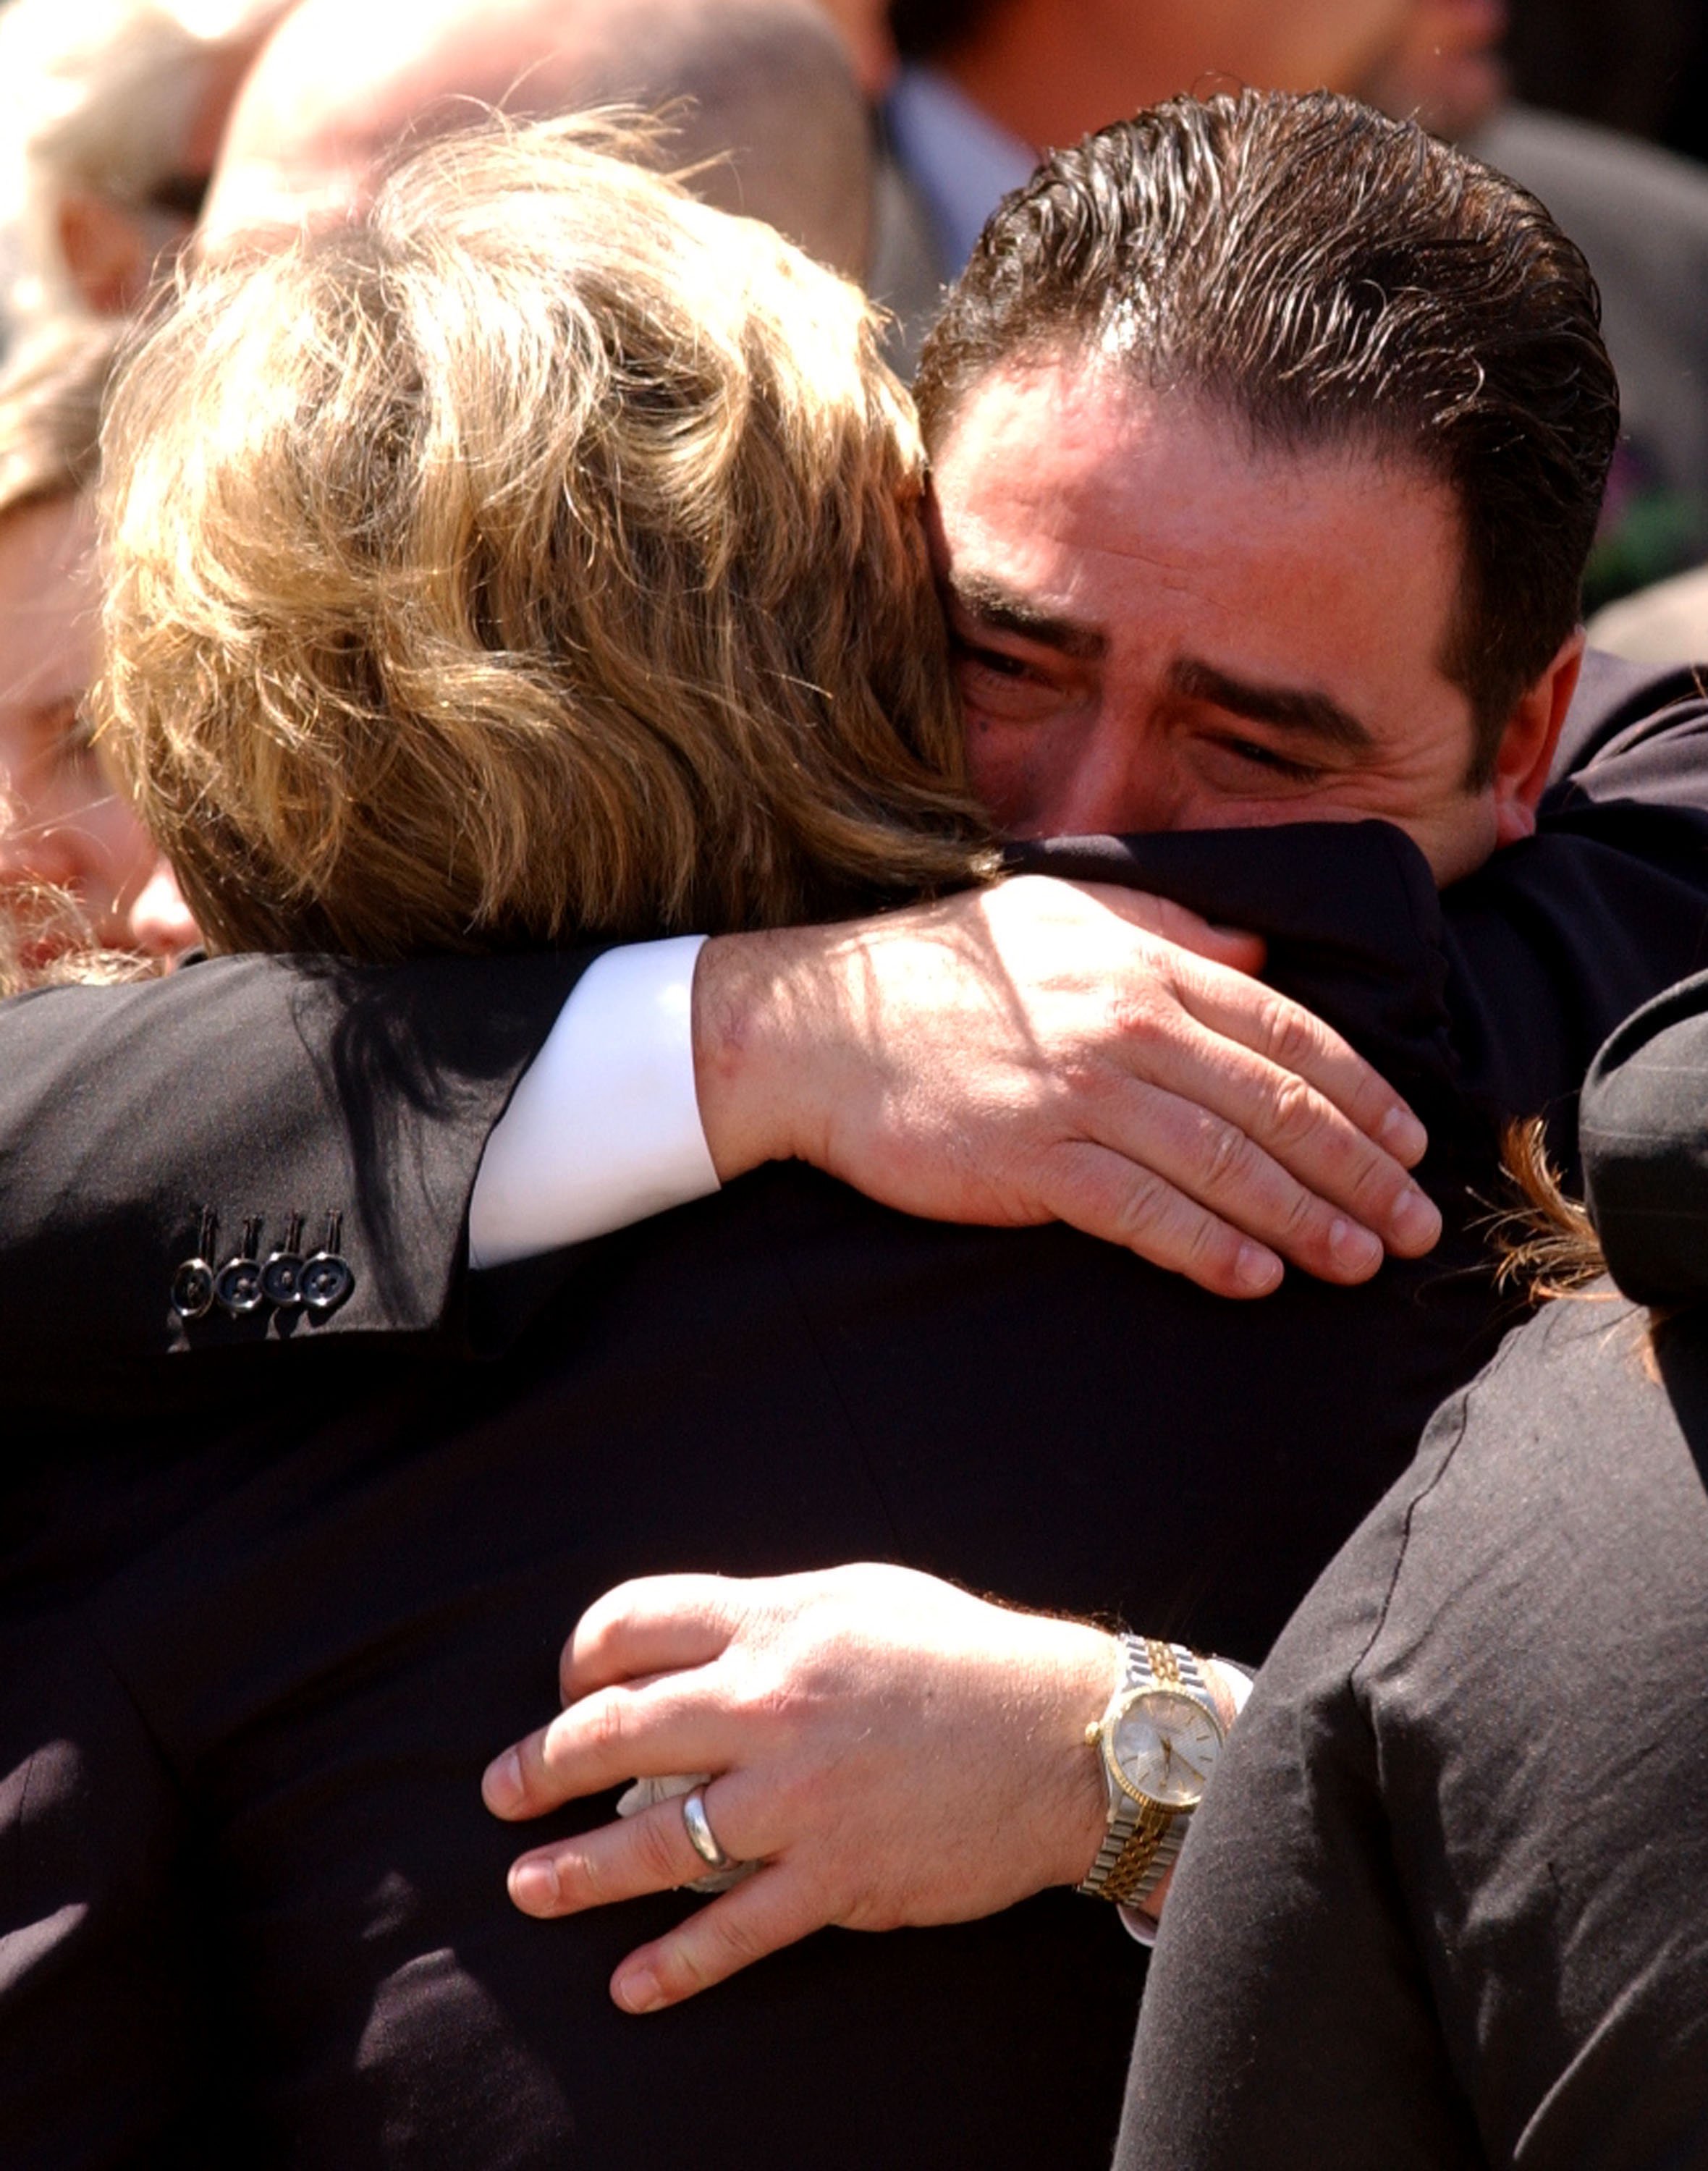 Heather Menzies is comforted by Emeril Lagasse after Robert Urich's funeral, April 19, 2002. |  Source: Getty Images